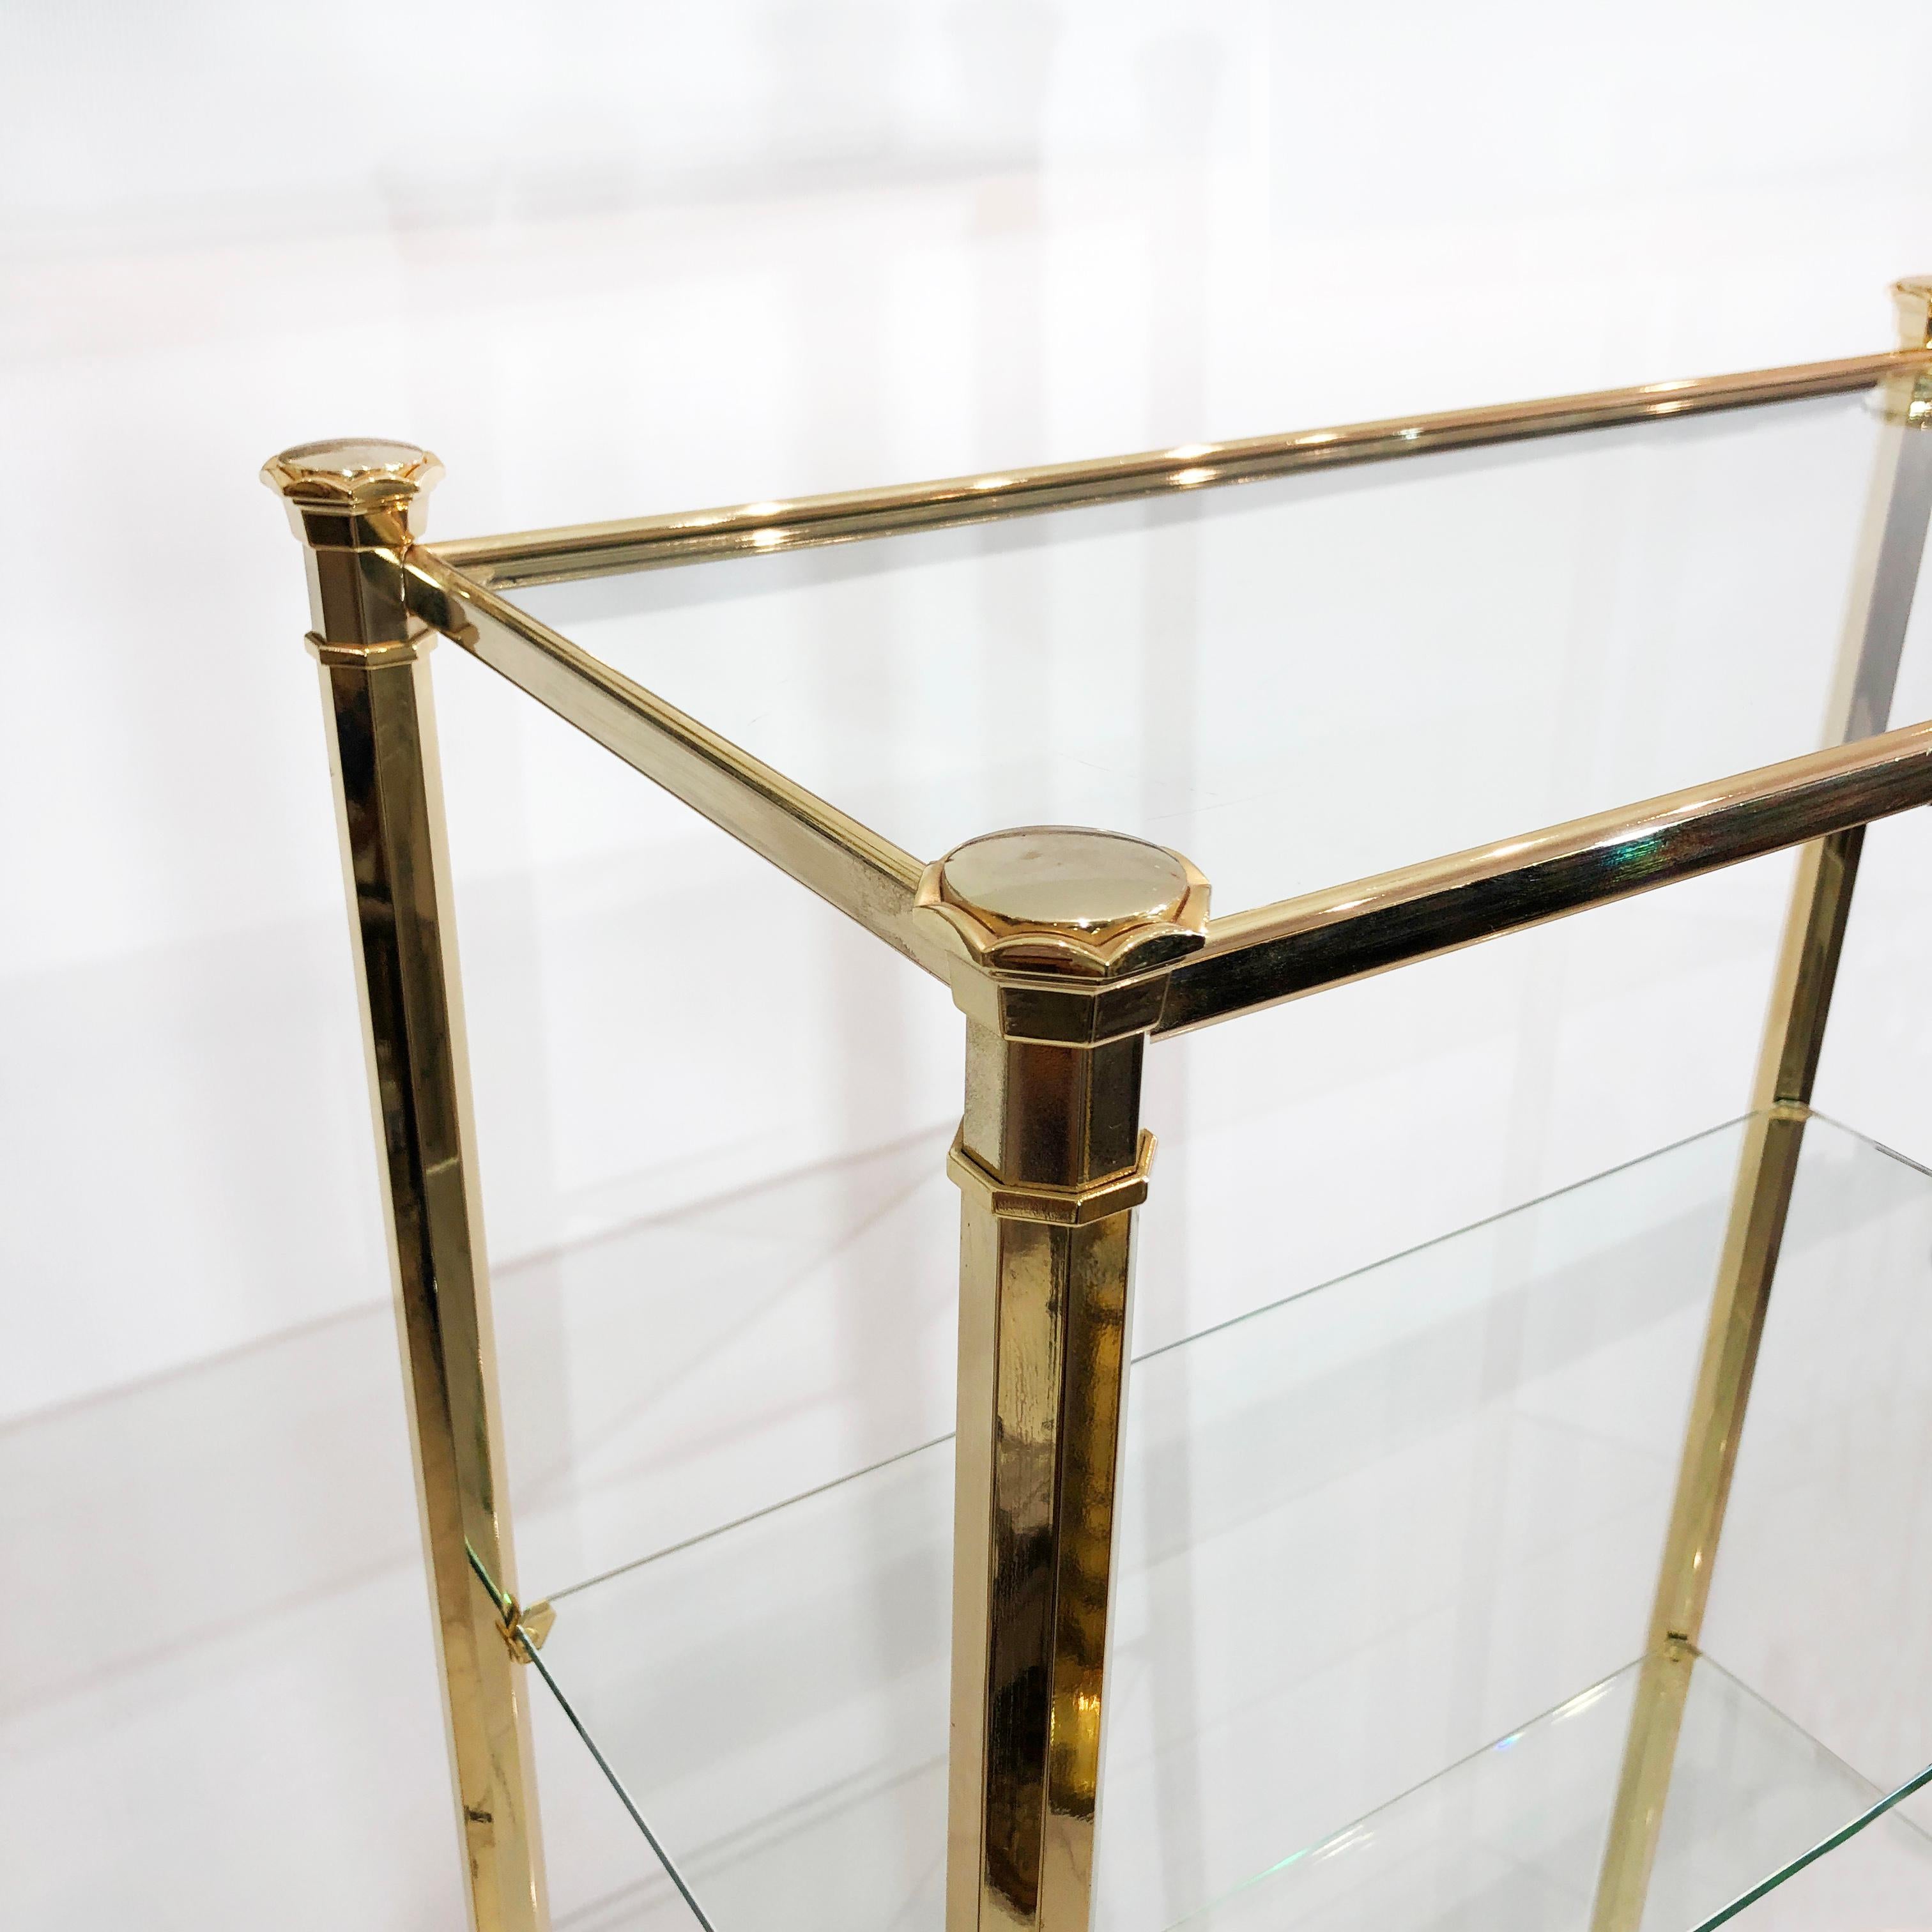 British Kesterport Gold Glass Polygonal Etagere Brass Shelving 1980s Display Unit For Sale